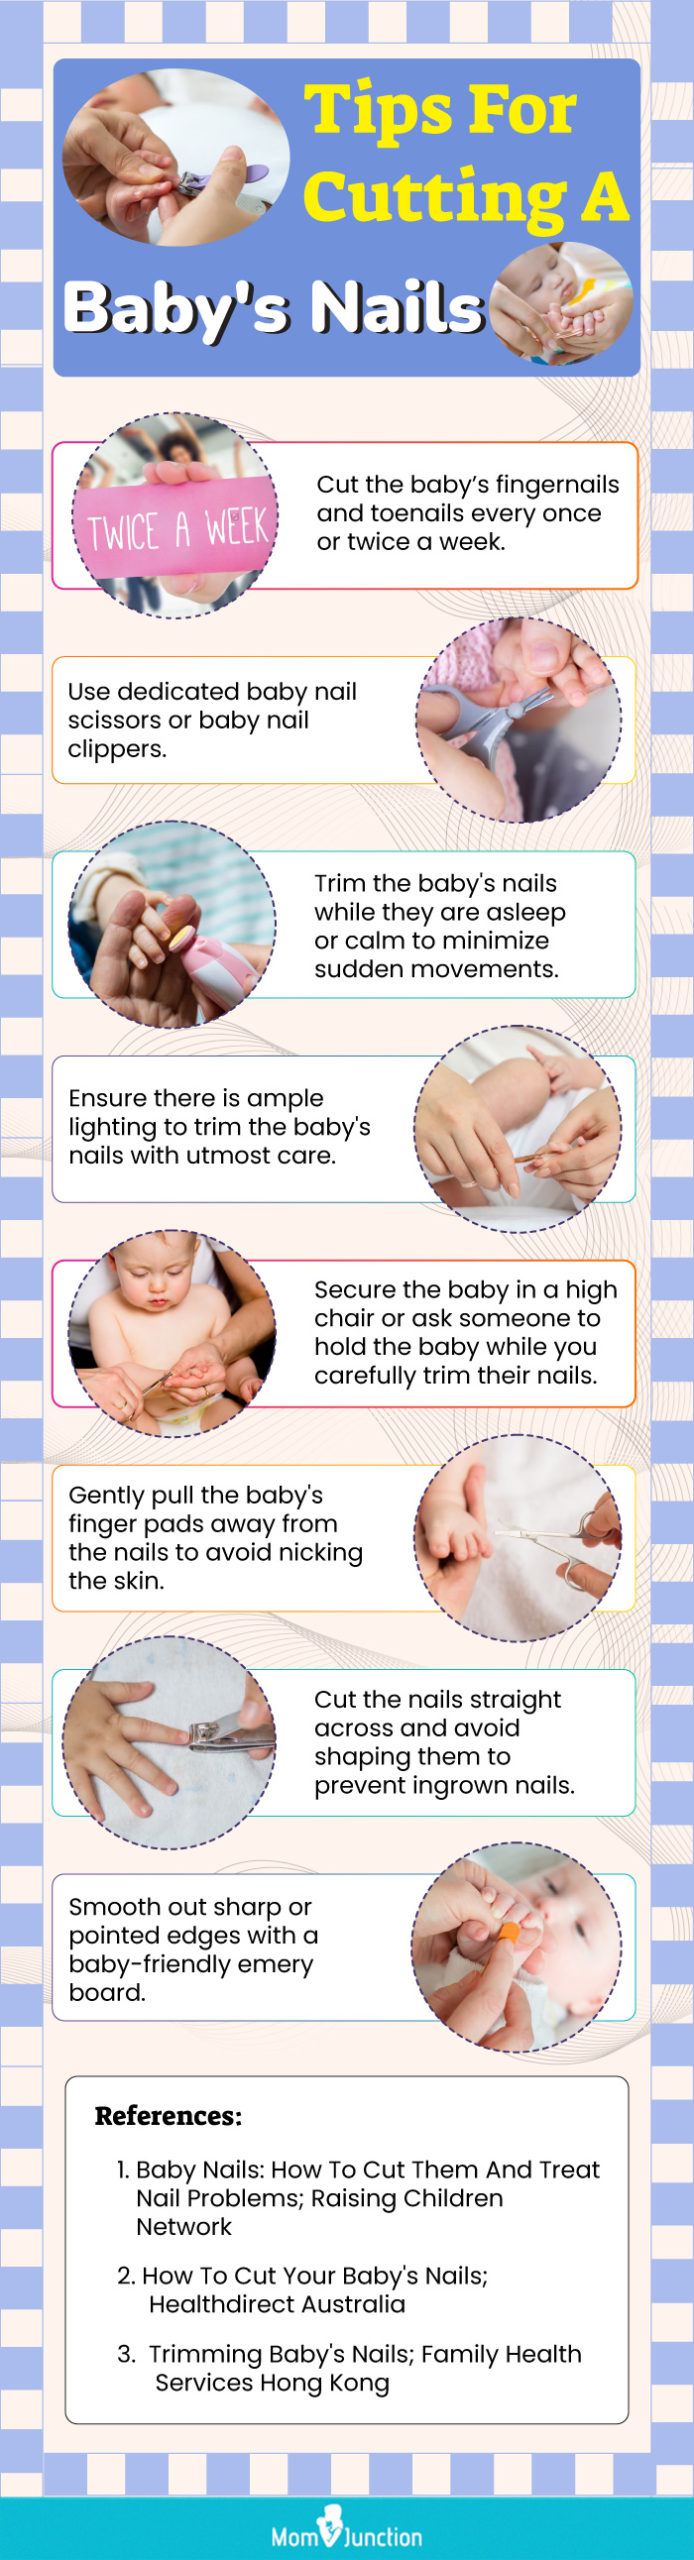 How to cut your baby's nails